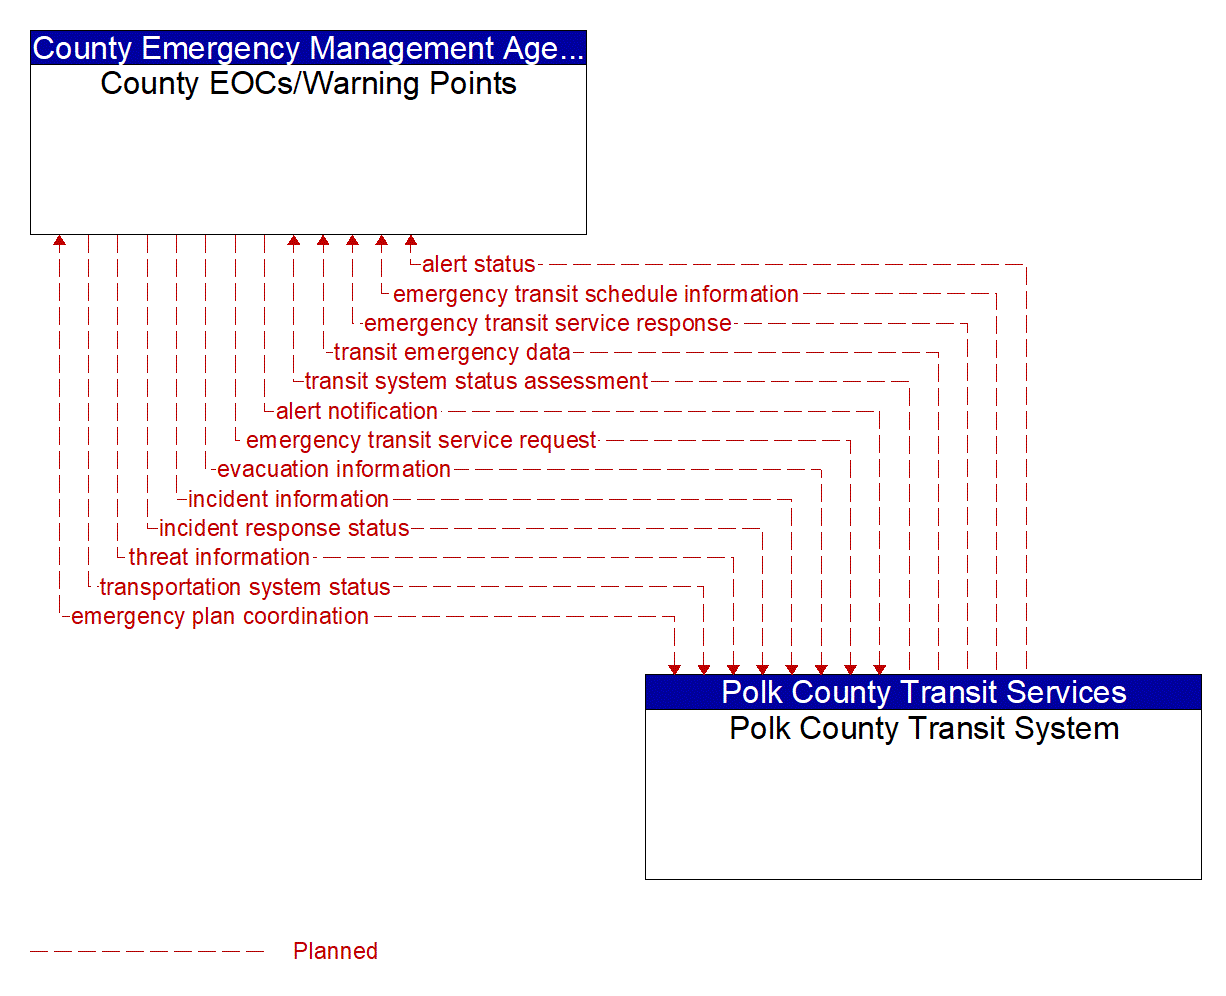 Architecture Flow Diagram: Polk County Transit System <--> County EOCs/Warning Points